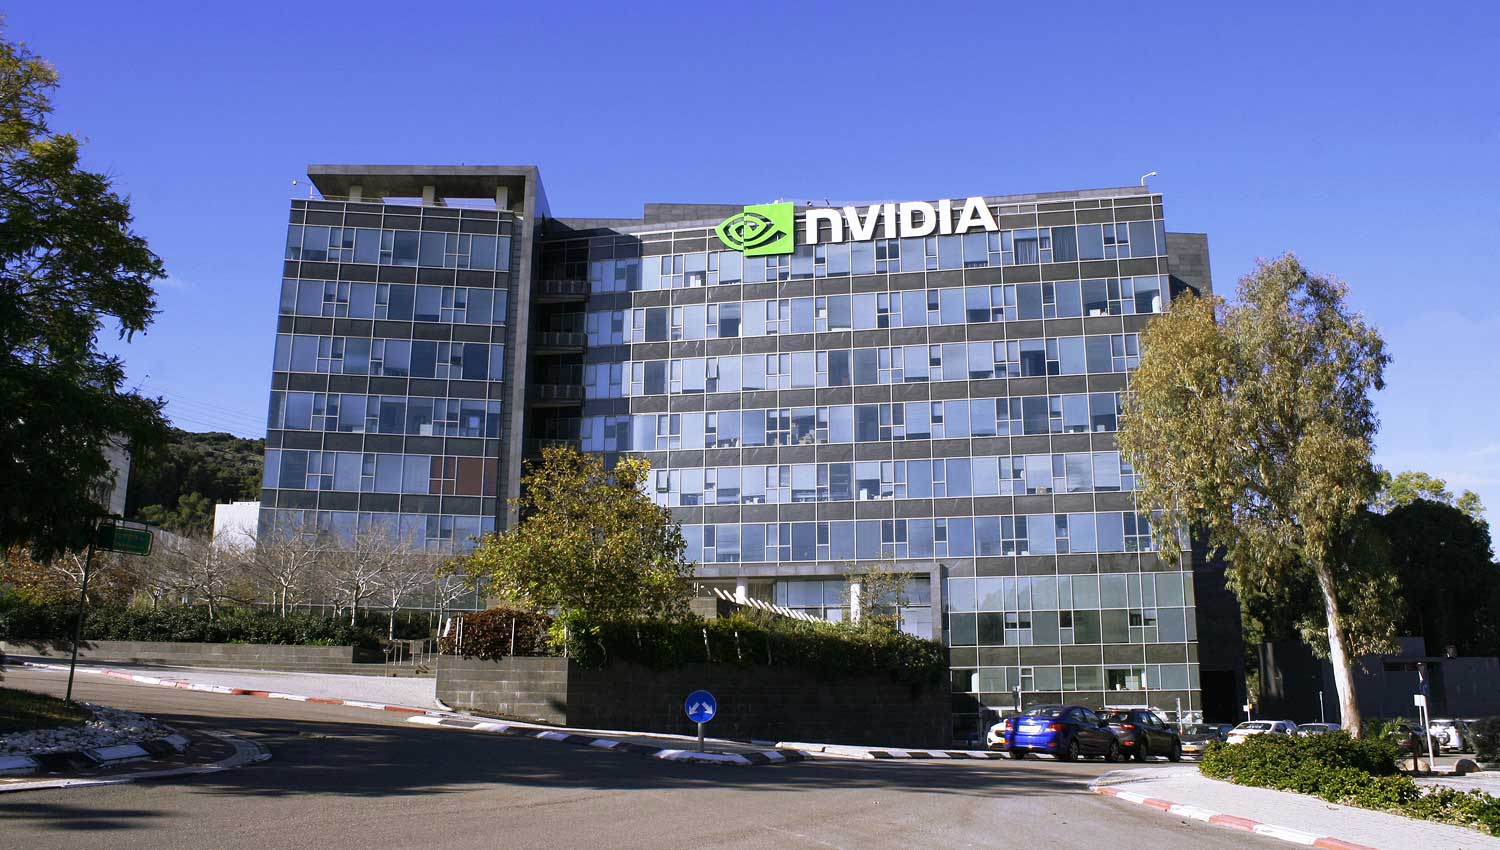 NVIDIA’s remodeled nine-story network business headquarters in Yokneam, Israel, was designed to blend advanced AV technology into the modern aesthetic of sophisticated professionalism.